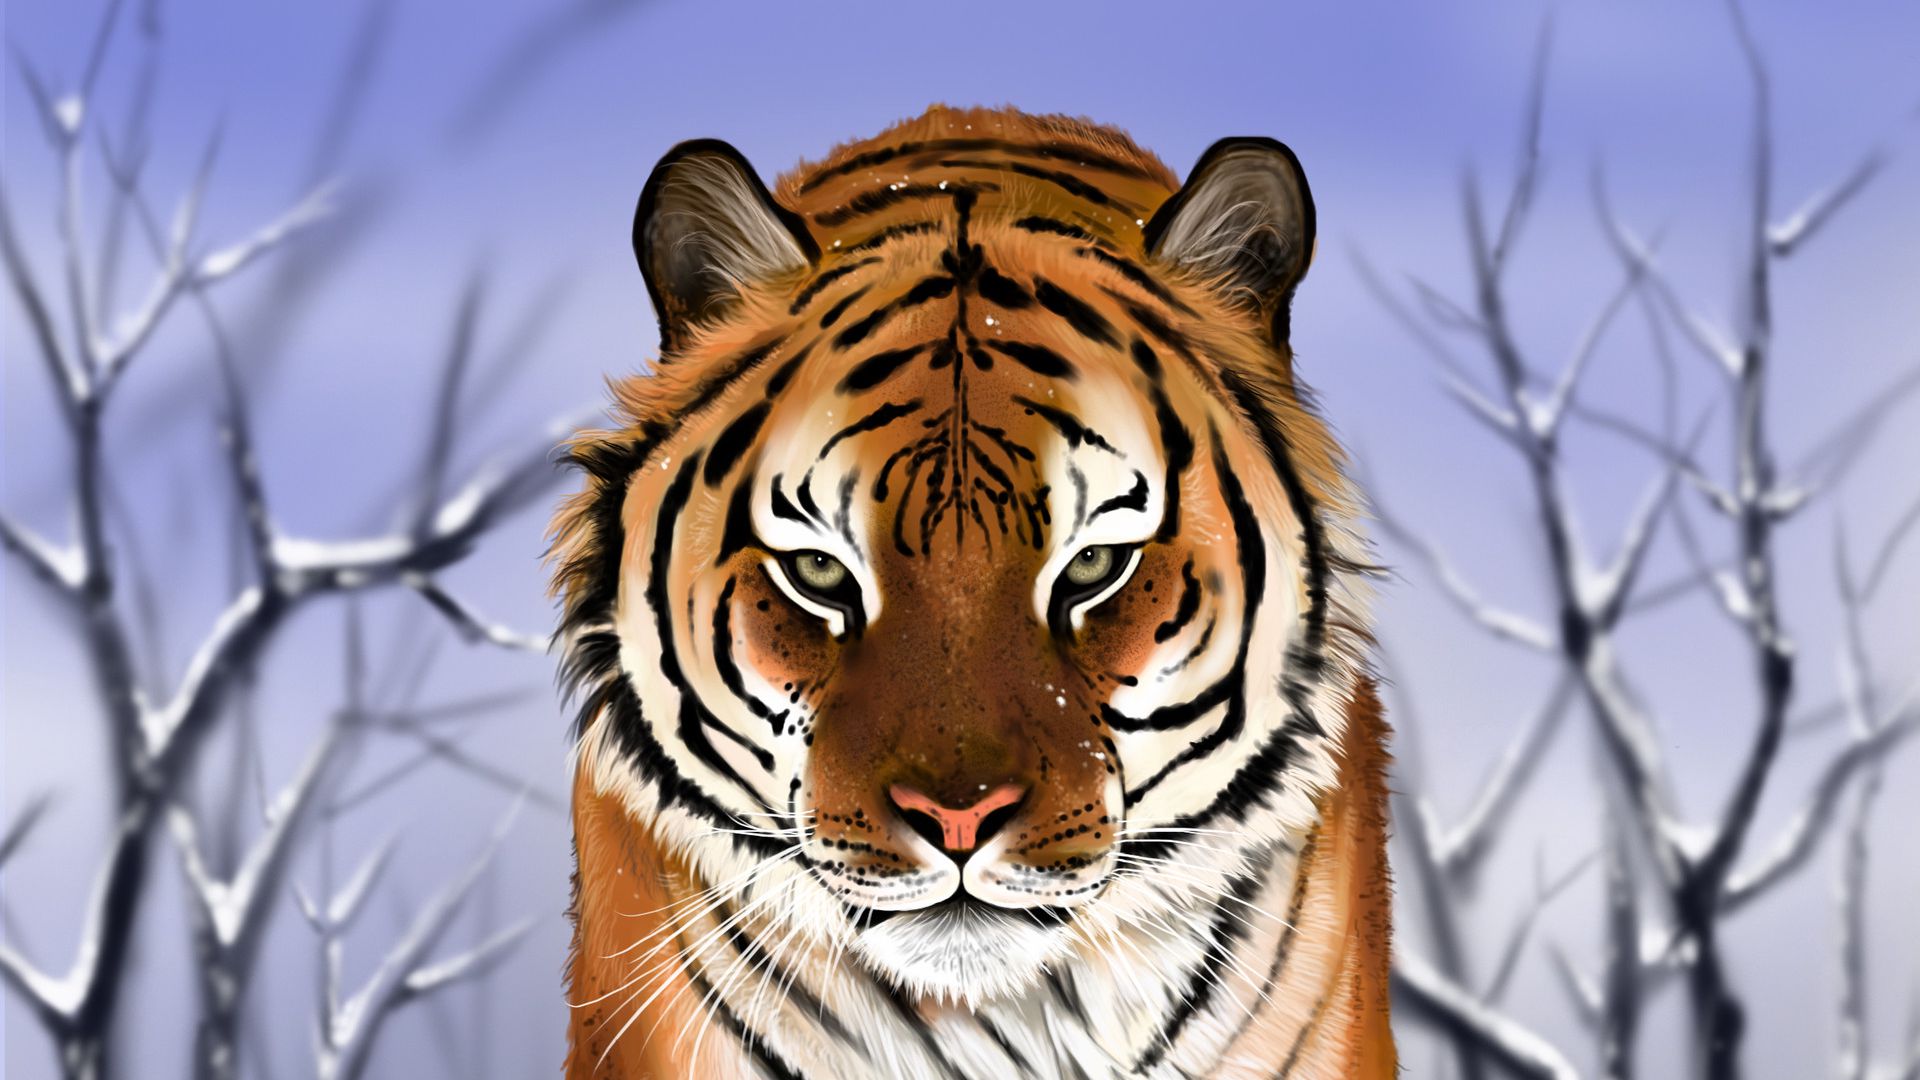 Painting Tiger Winter 1920x1080